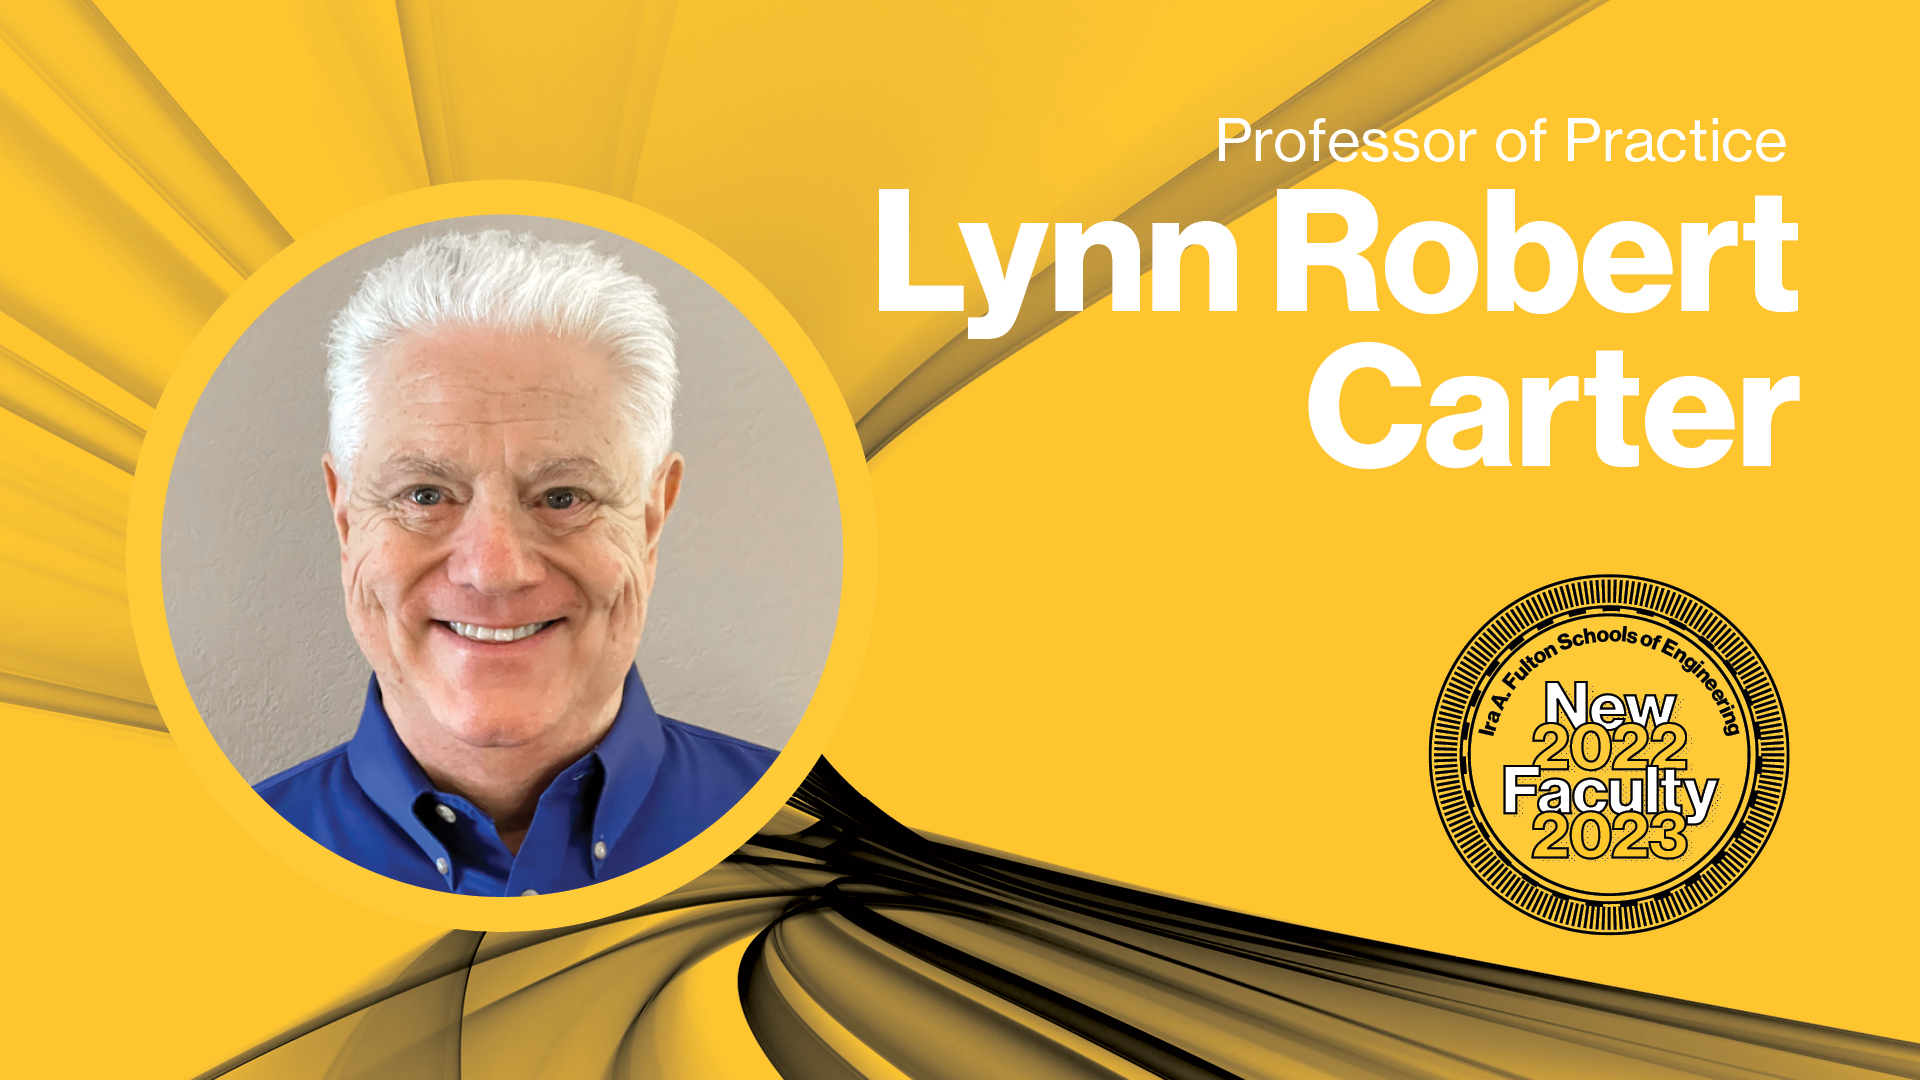 Professor of Practice Lynn Robert Carter Ira A. Fulton Schools of Engineering New Faculty 2022-2023 with a headshot